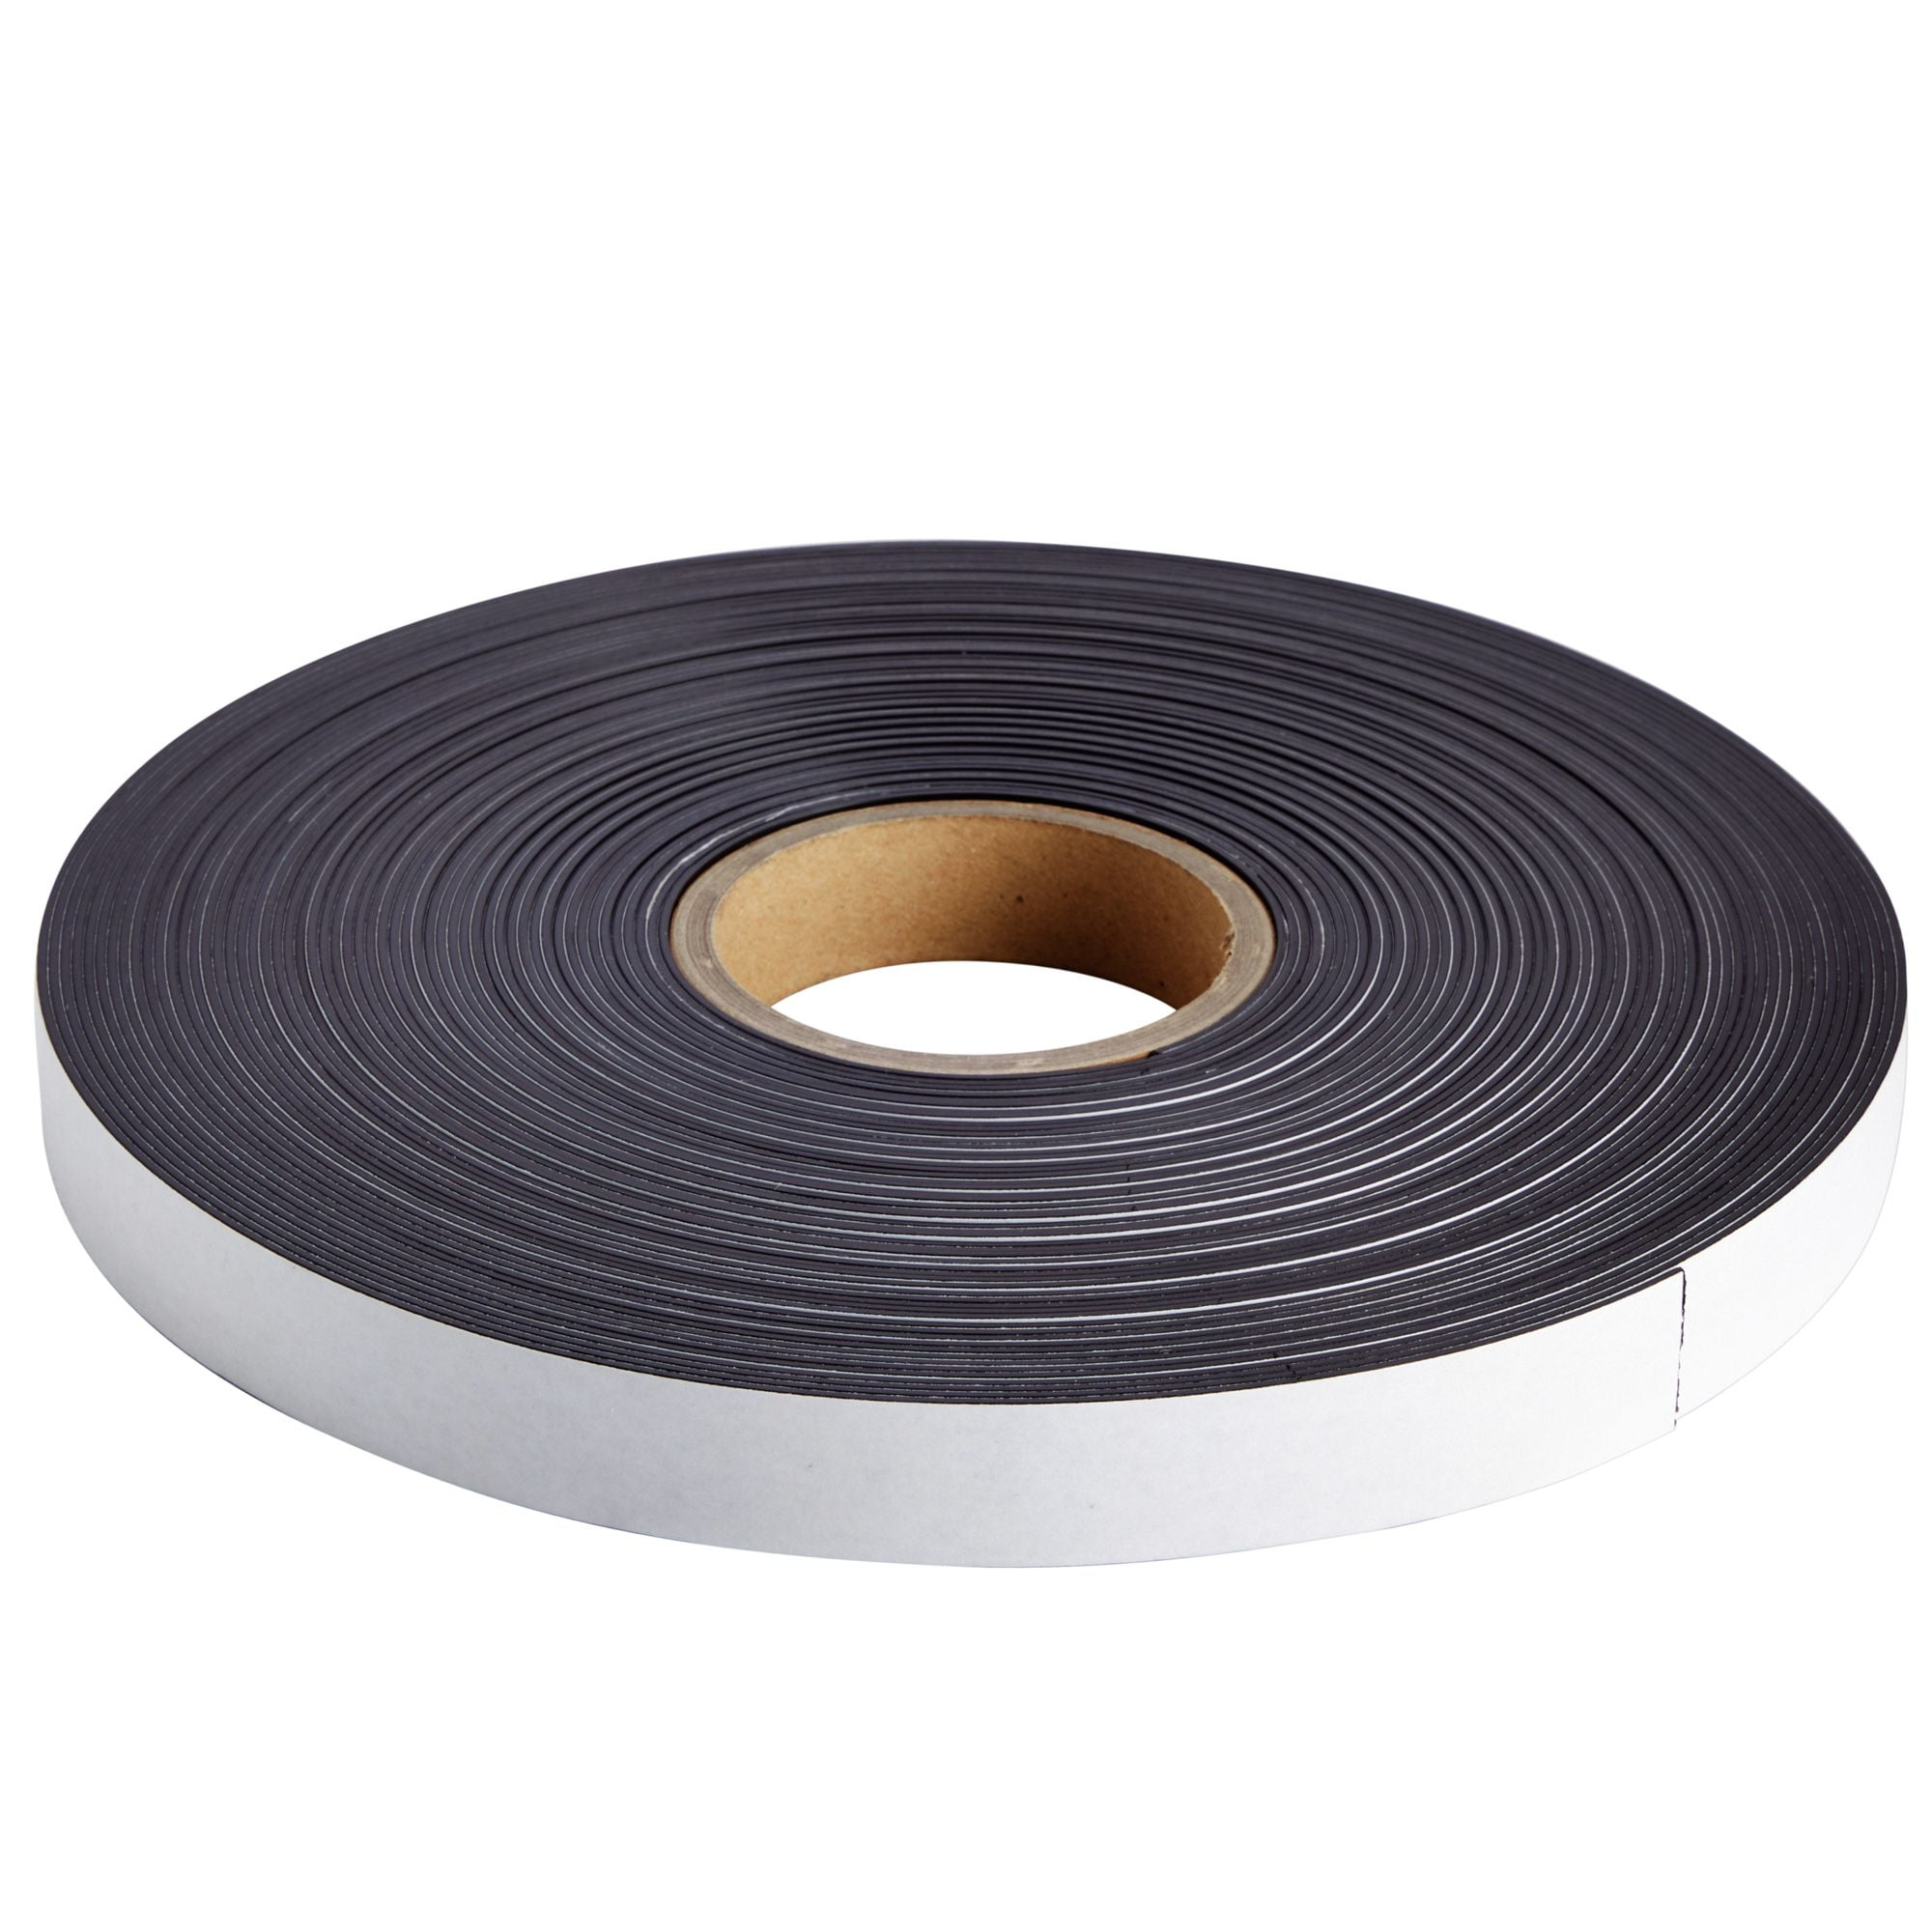  Raifenc Magnetic Tape, 17 ft Magnetic Strip (1/2 inch Wide x  17 feet Long) with Strong Adhesive Backing. Great for DIY, Art Projects,  whiteboards and : Office Products